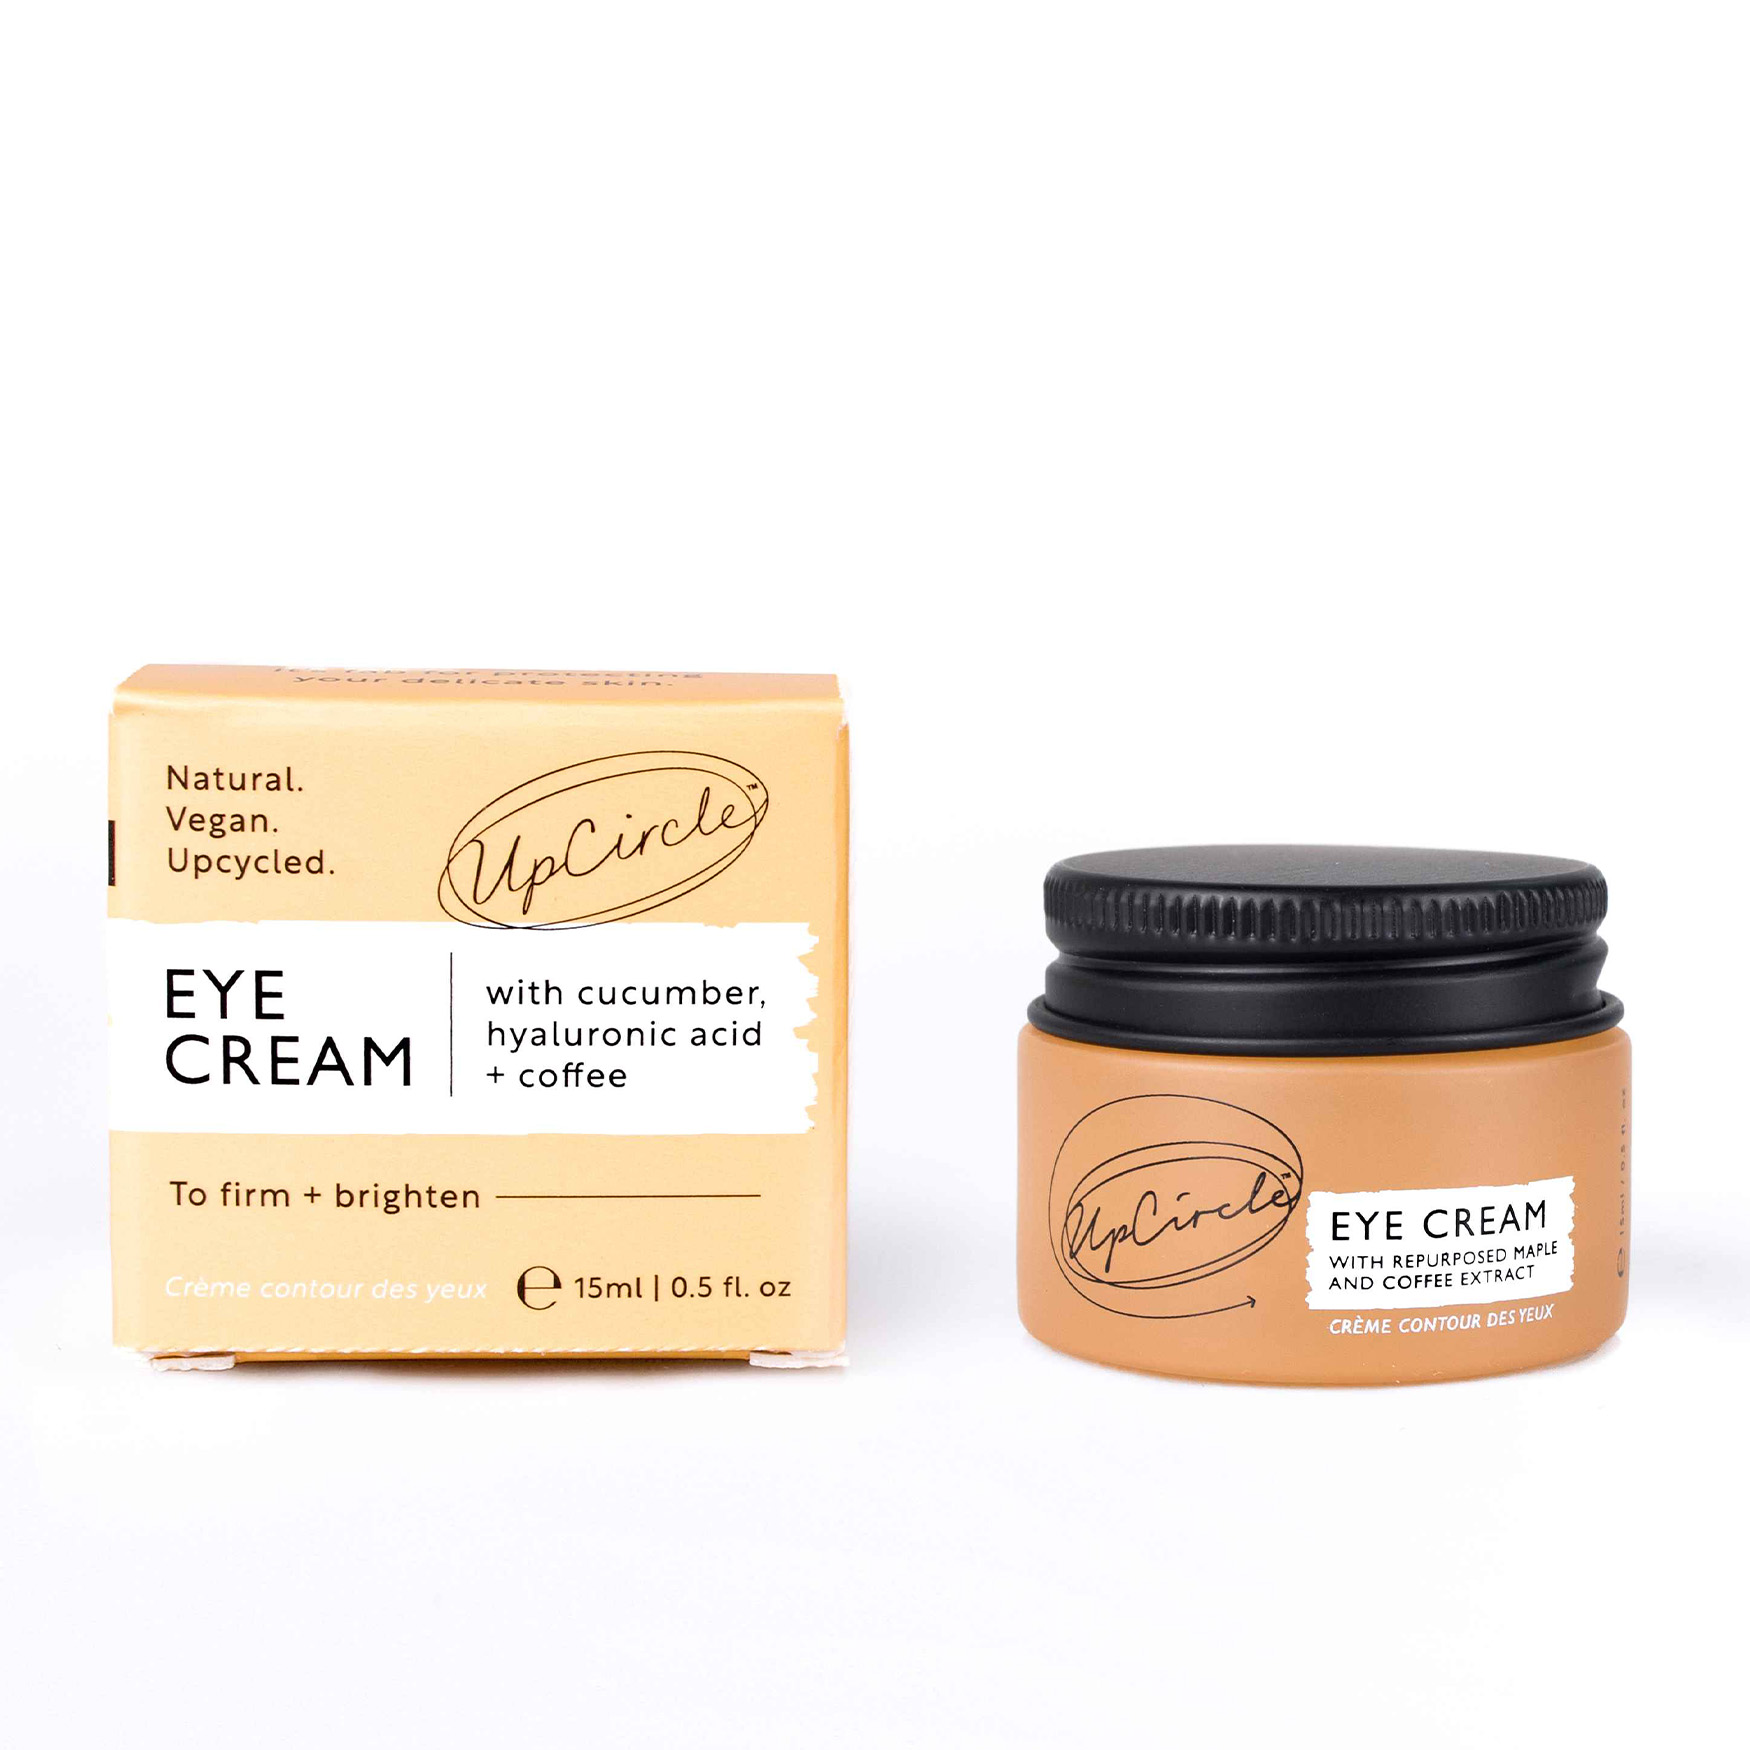 Upcircle Eye Cream with Repurposed Maple and Coffee Extract | Space NK